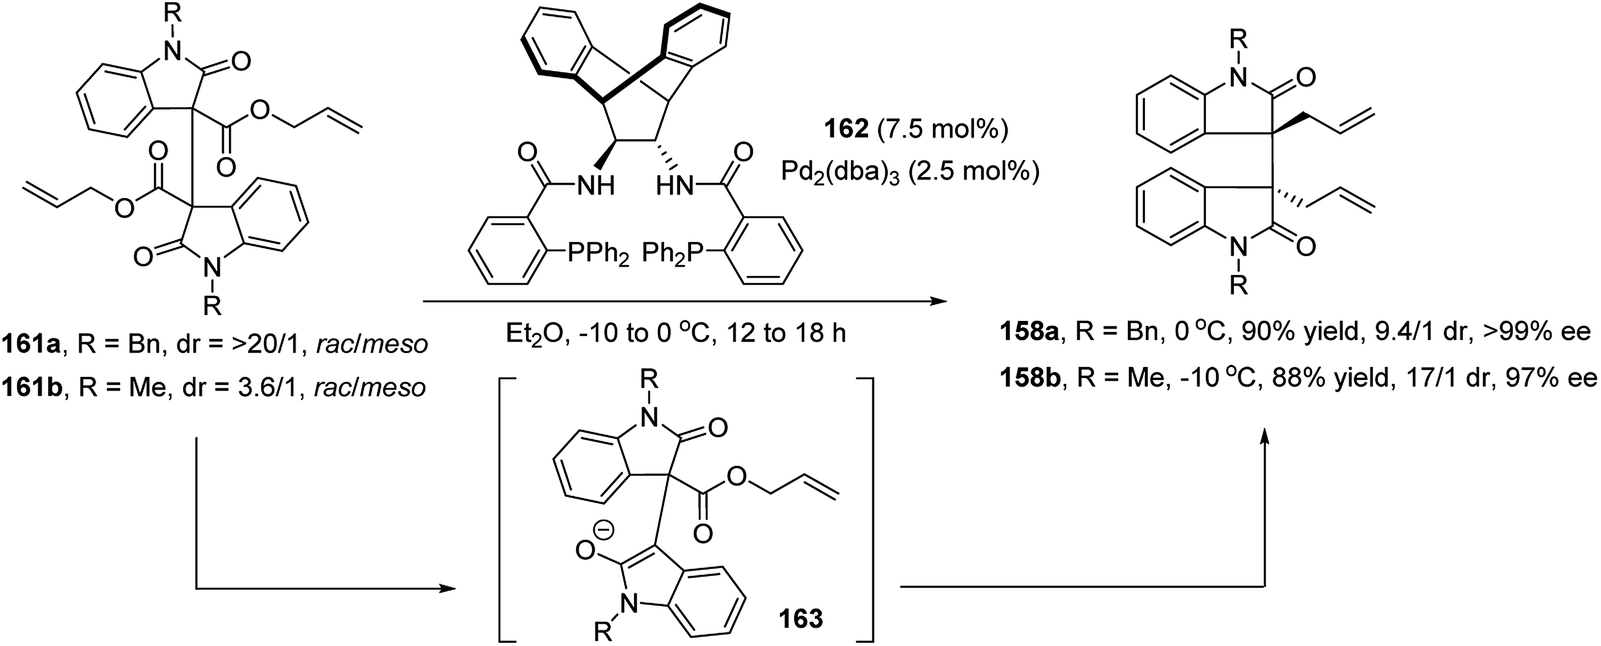 Catalytic Enantioselective Construction Of Vicinal Quaternary Carbon Stereocenters Chemical Science Rsc Publishing Doi 10 1039 D0sc03249b